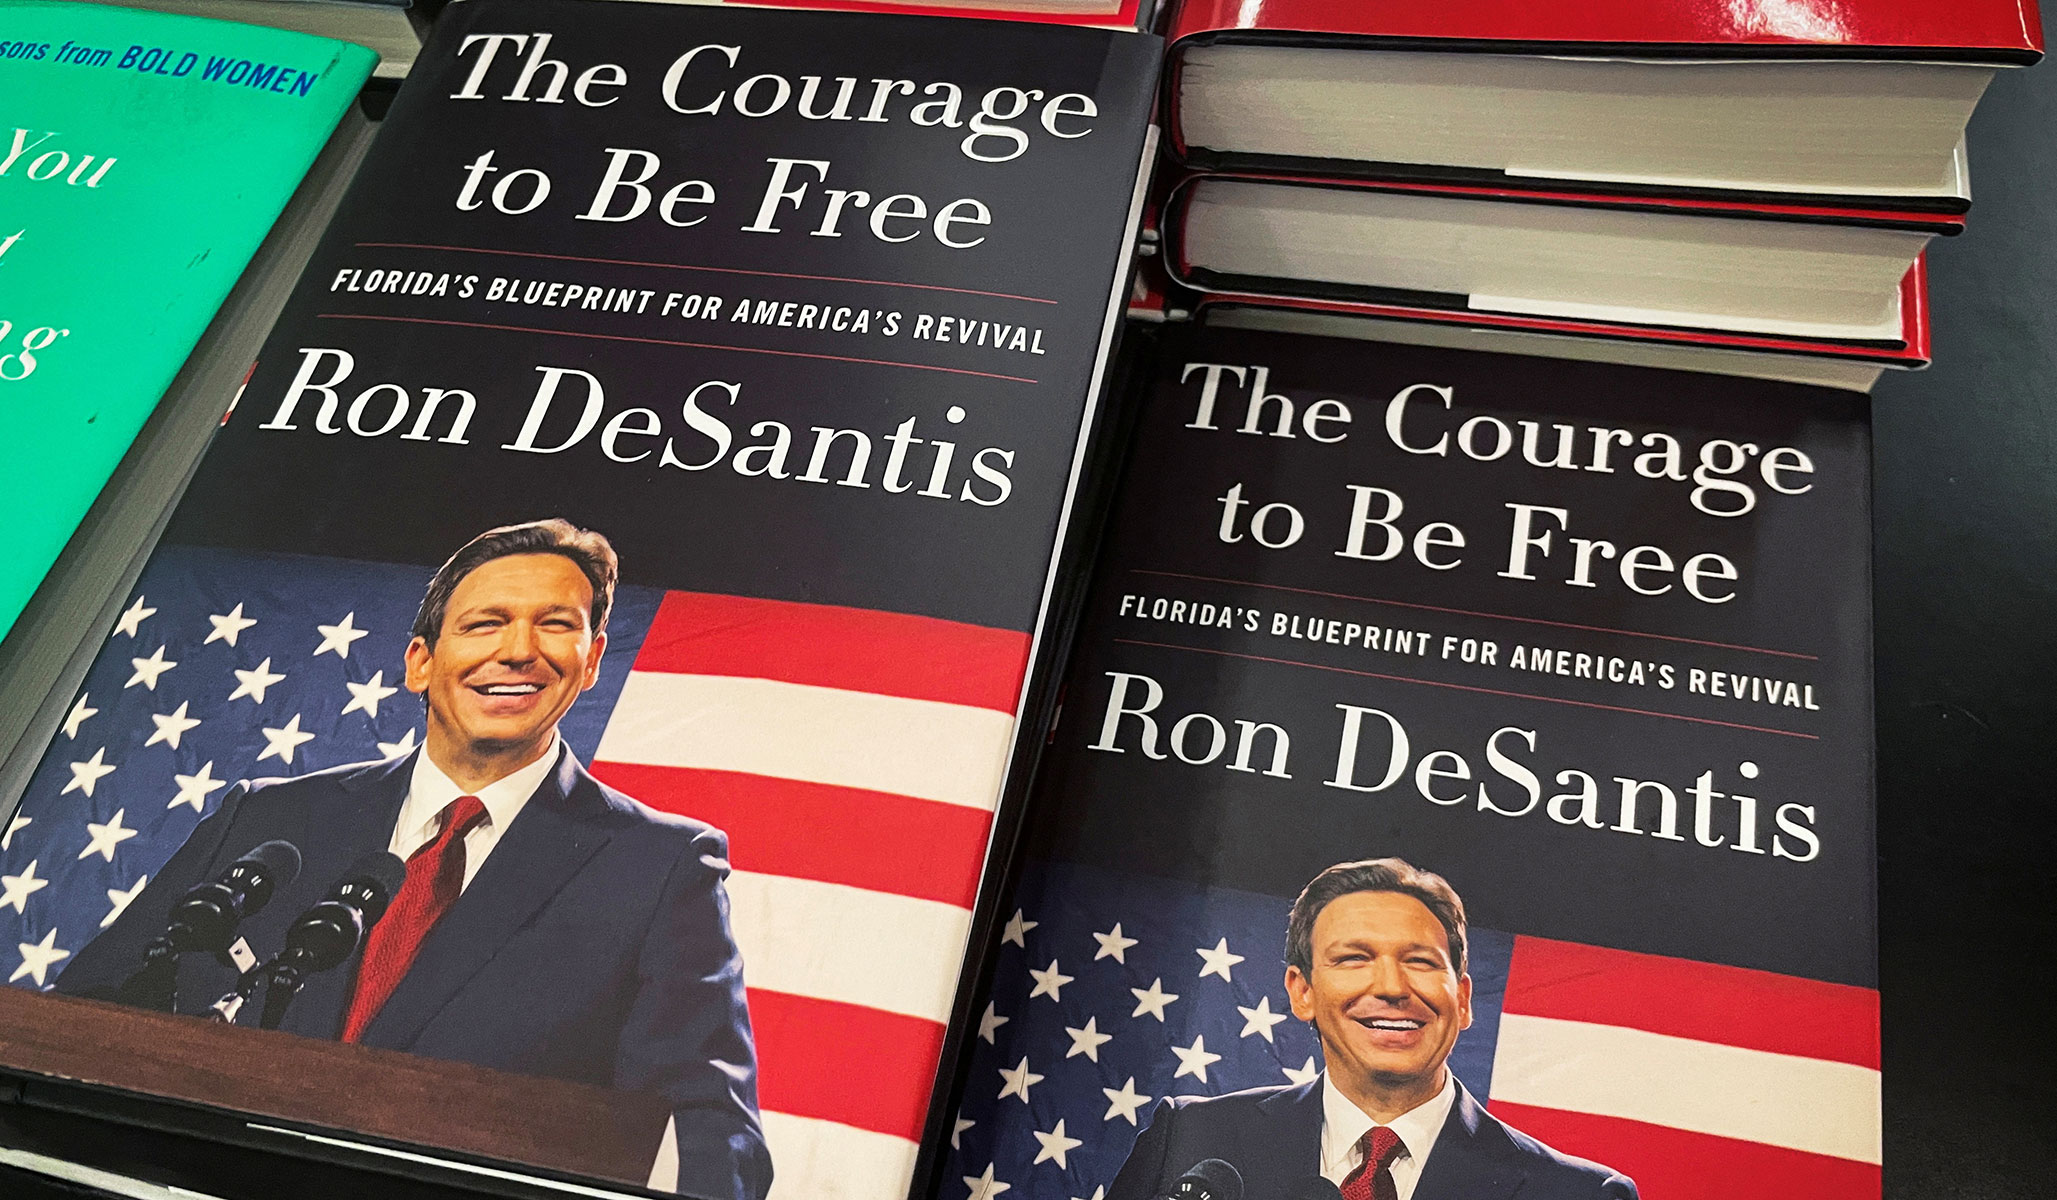 DeSantis Book Outsells Books by Trump, Obama in Its First Week | National Review